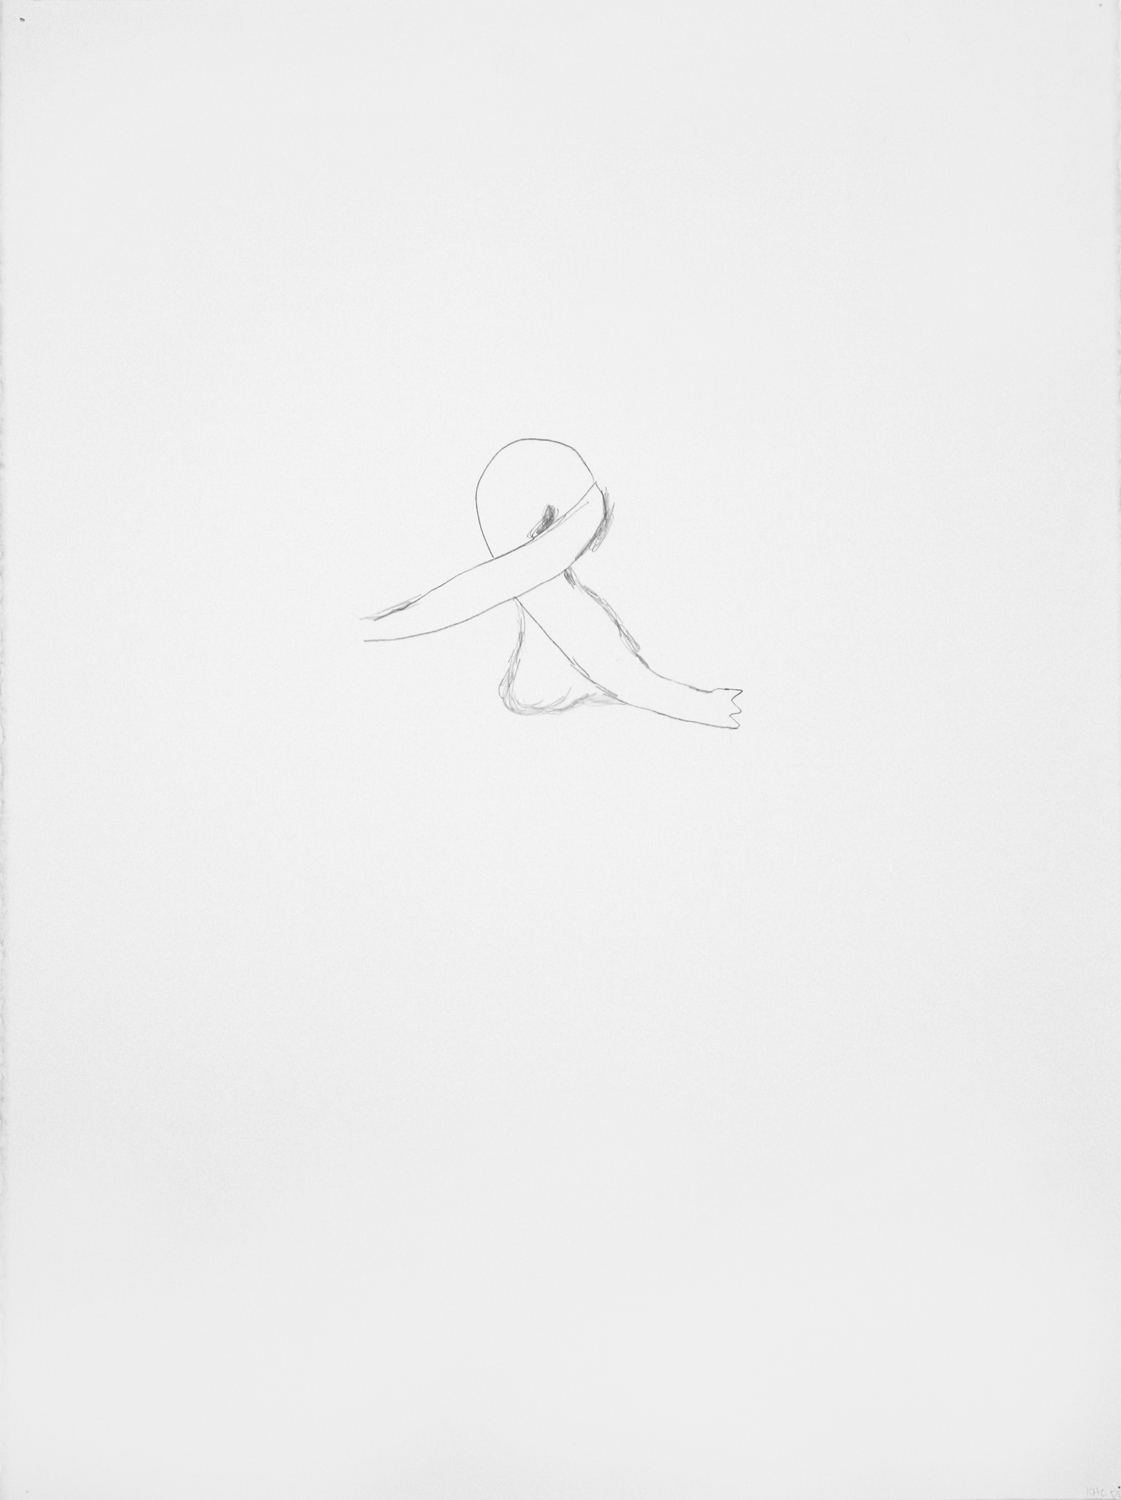  Untitled, 2012. 30" x 22", pencil on paper. 